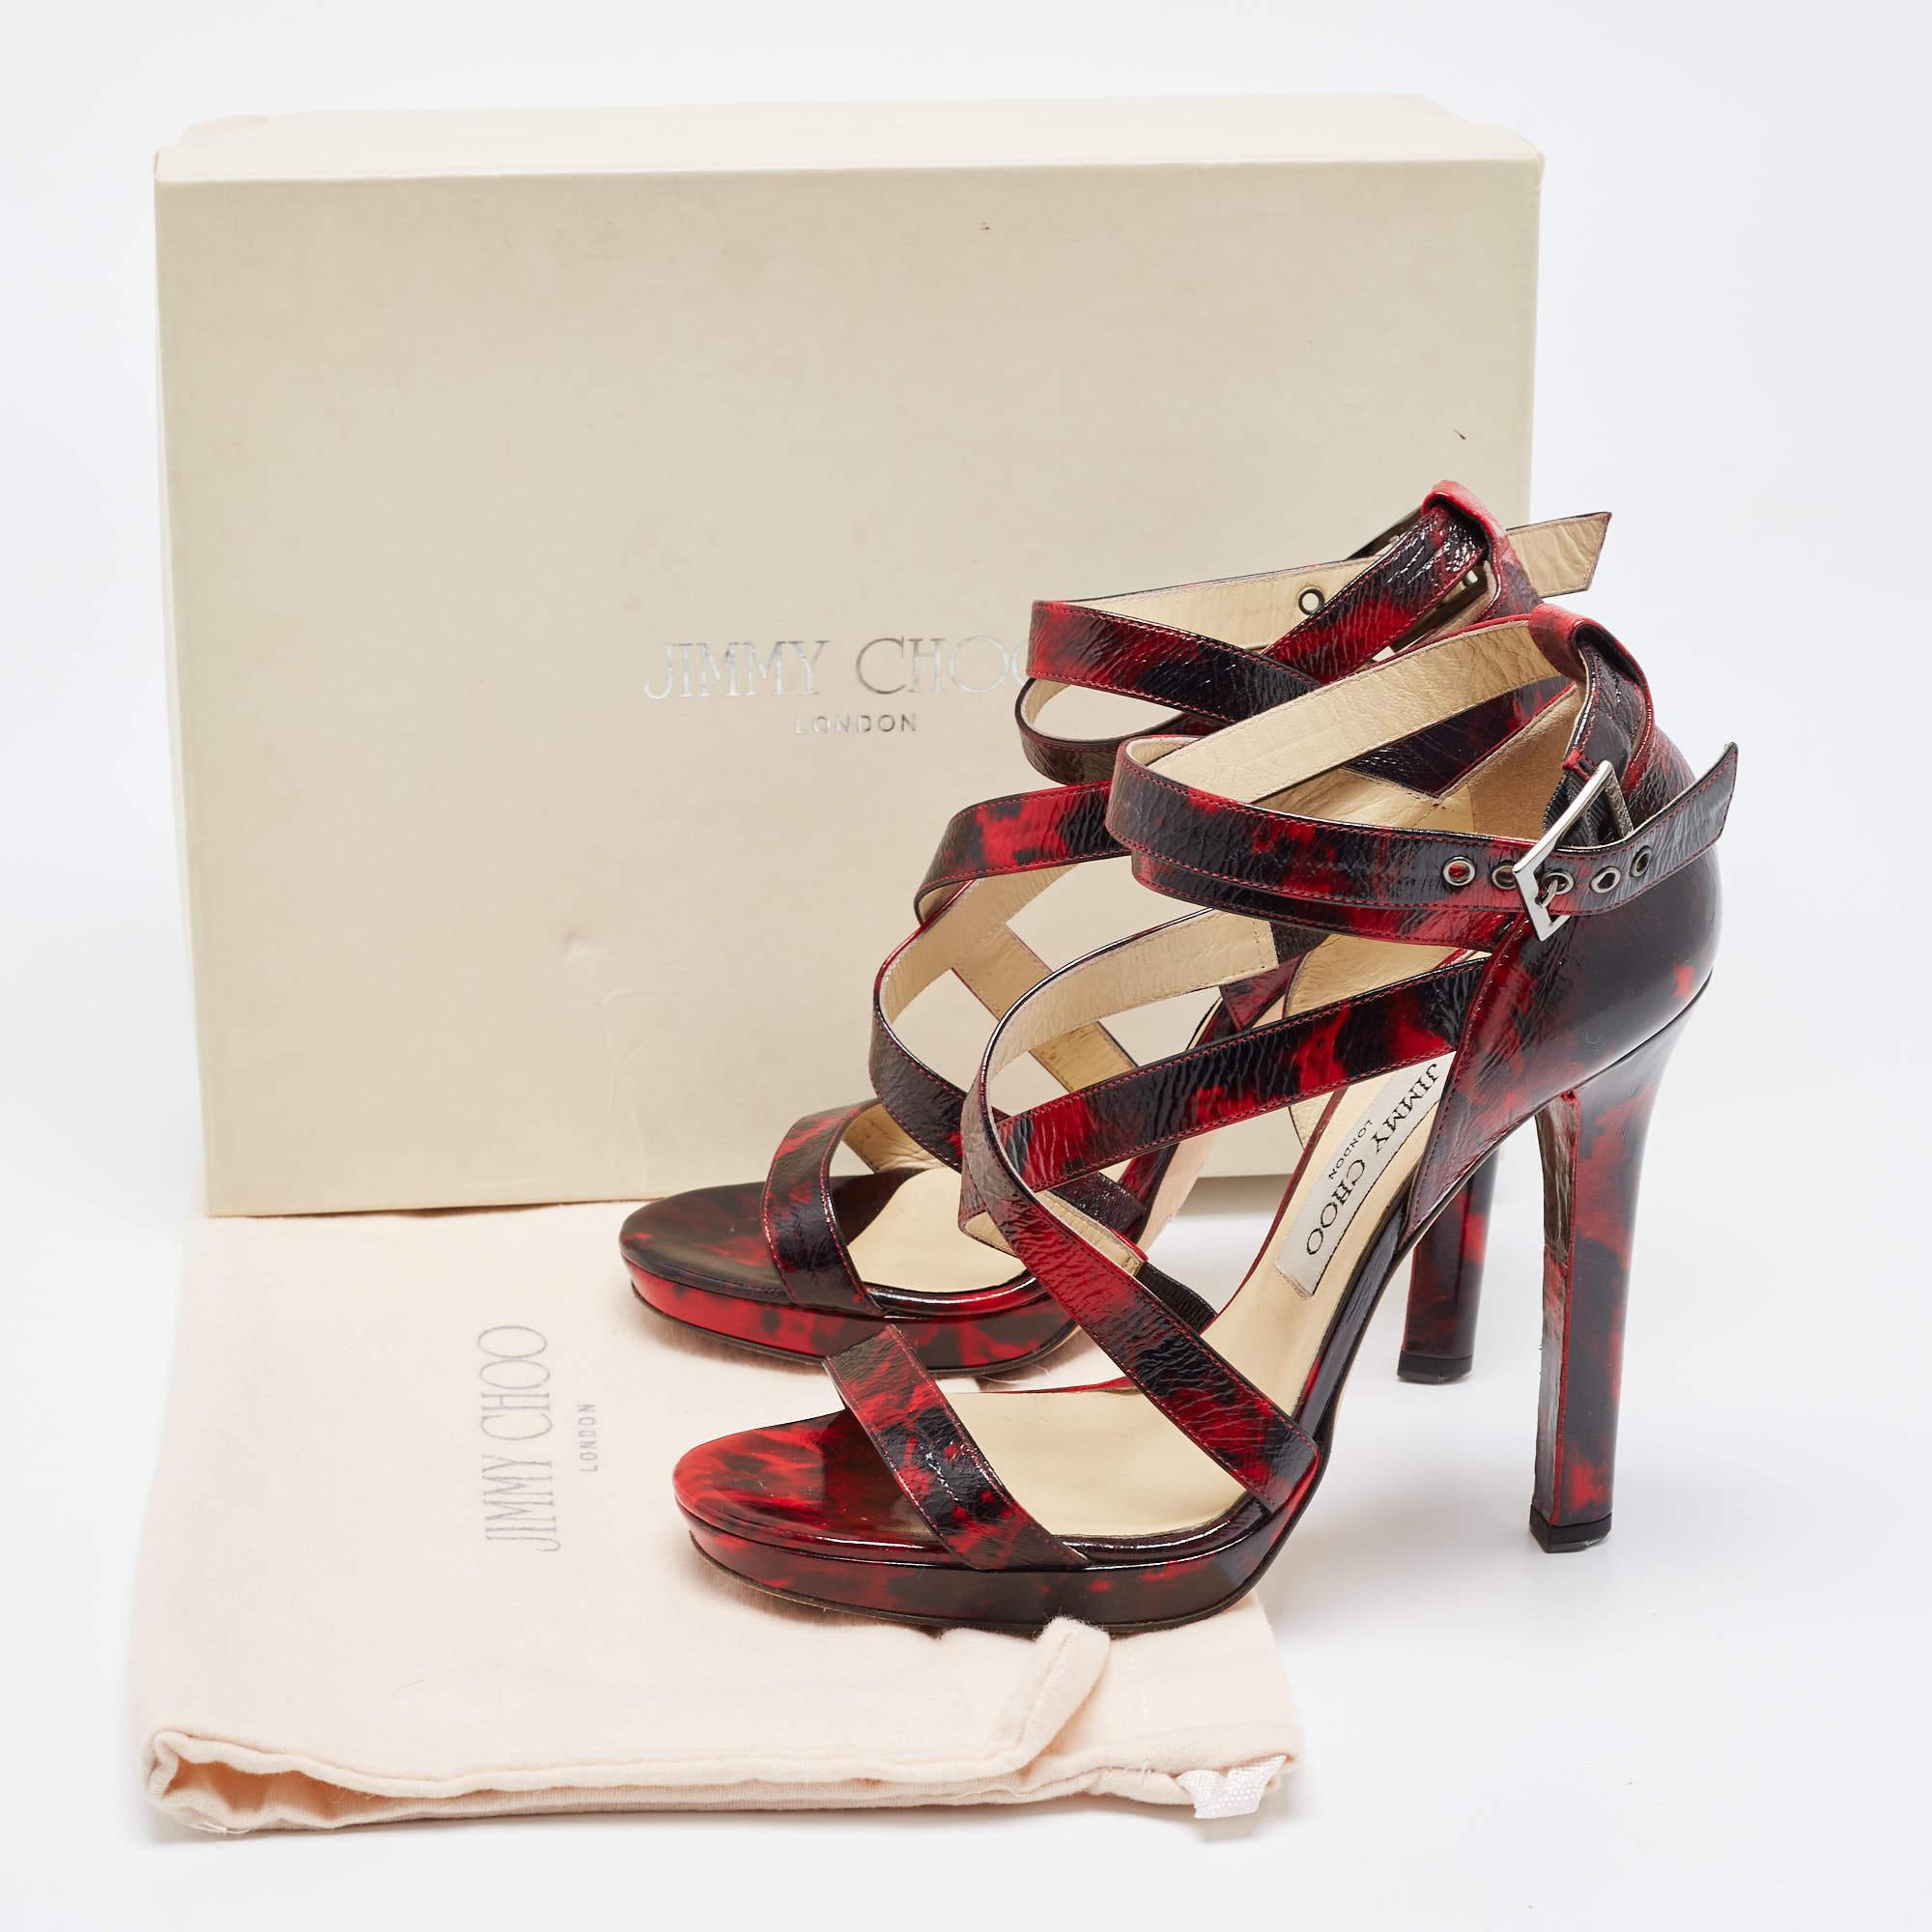 Jimmy Choo Red/Black Leather Criss Cross Ankle Strap Sandals Size 37.5 For Sale 5